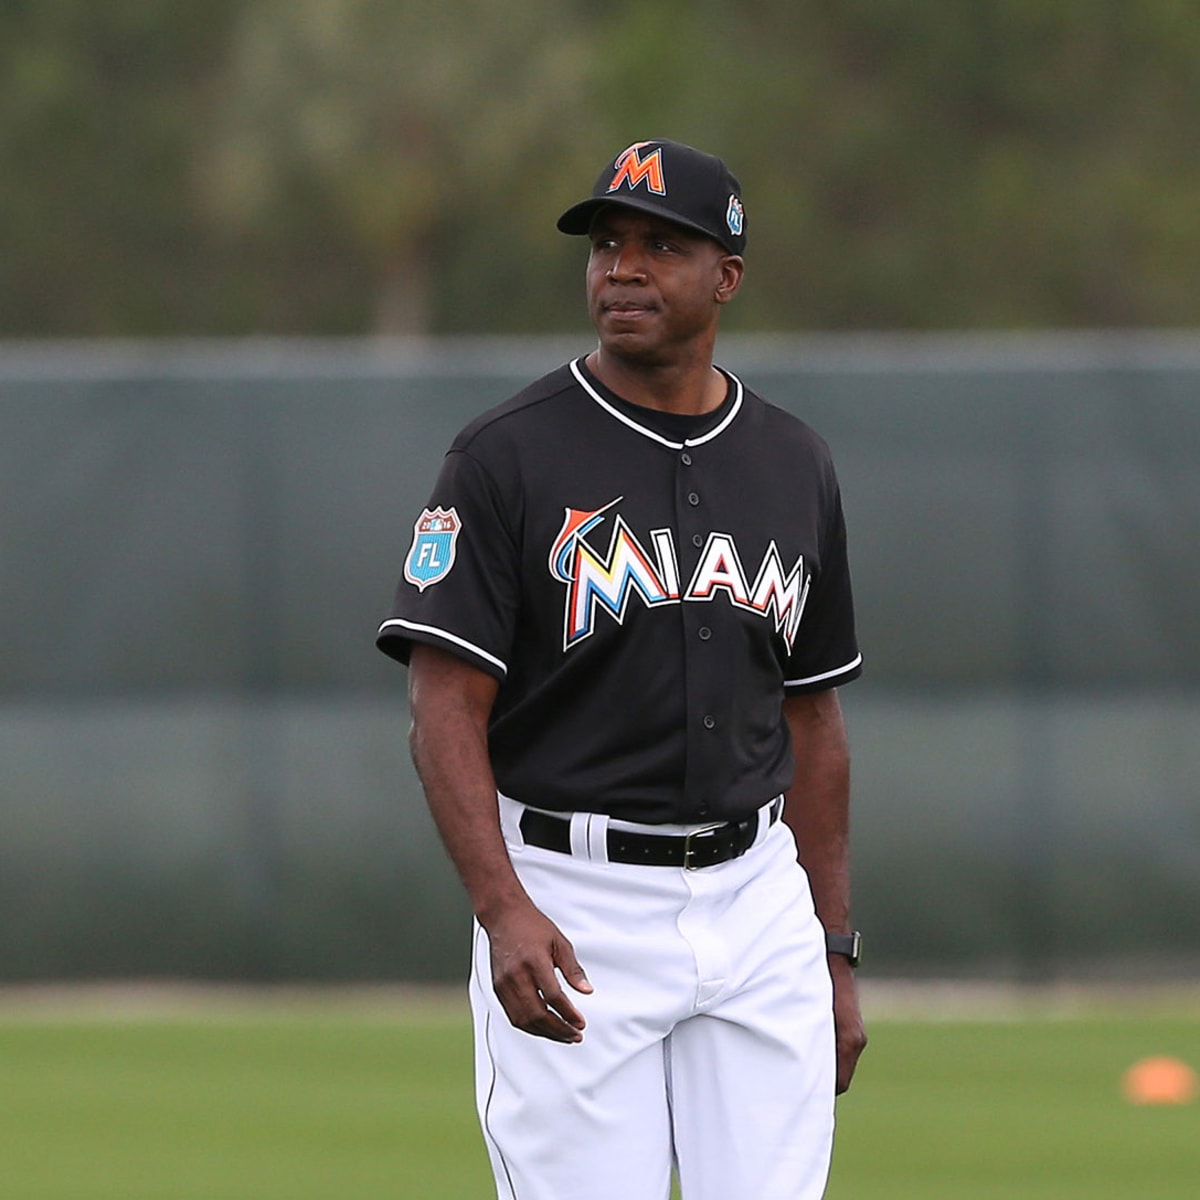 Coach Barry Bonds returns to AT&T Park in a Marlins uniform